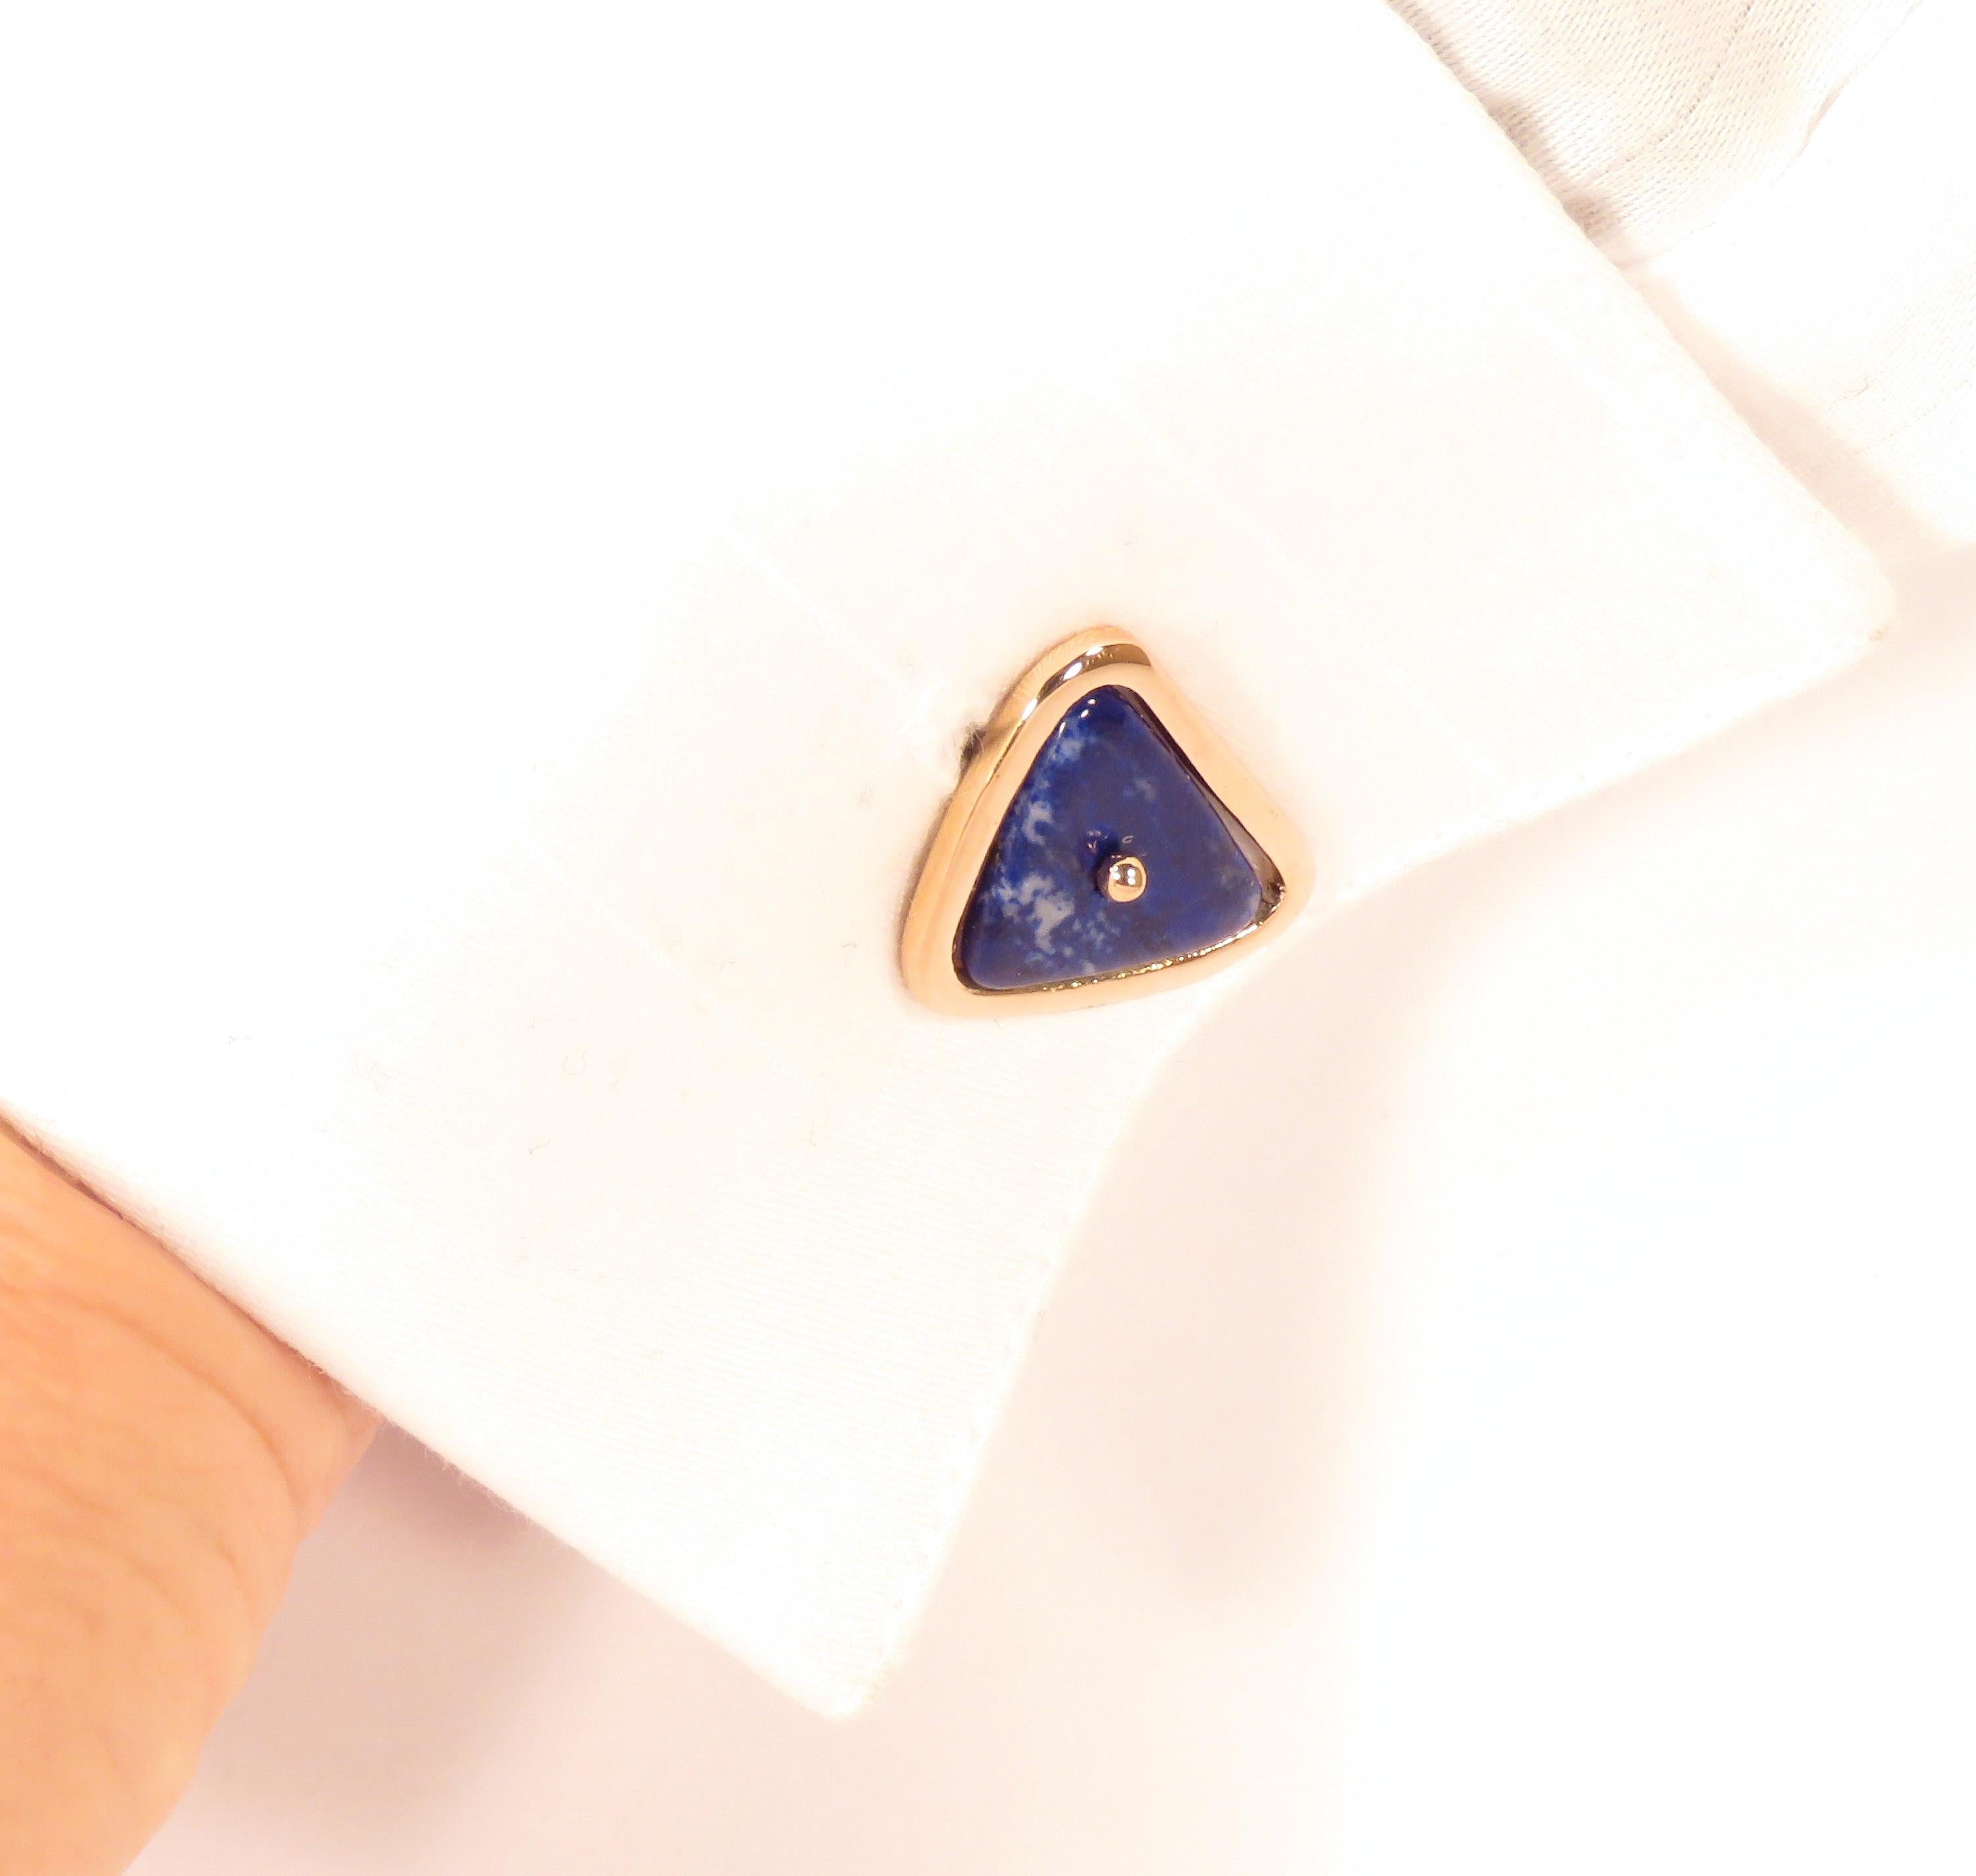 Contemporary cufflinks in 9 karat rose gold with lapis lazuli.
Stones size: the bigger stones are 24 x 15 mm / 0.944 x 0.590 inches, the smaller stones are 22 x 12 mm / 0.866 x 0.472 inches.
They are marked with the Italian Gold Mark 375 and Botta